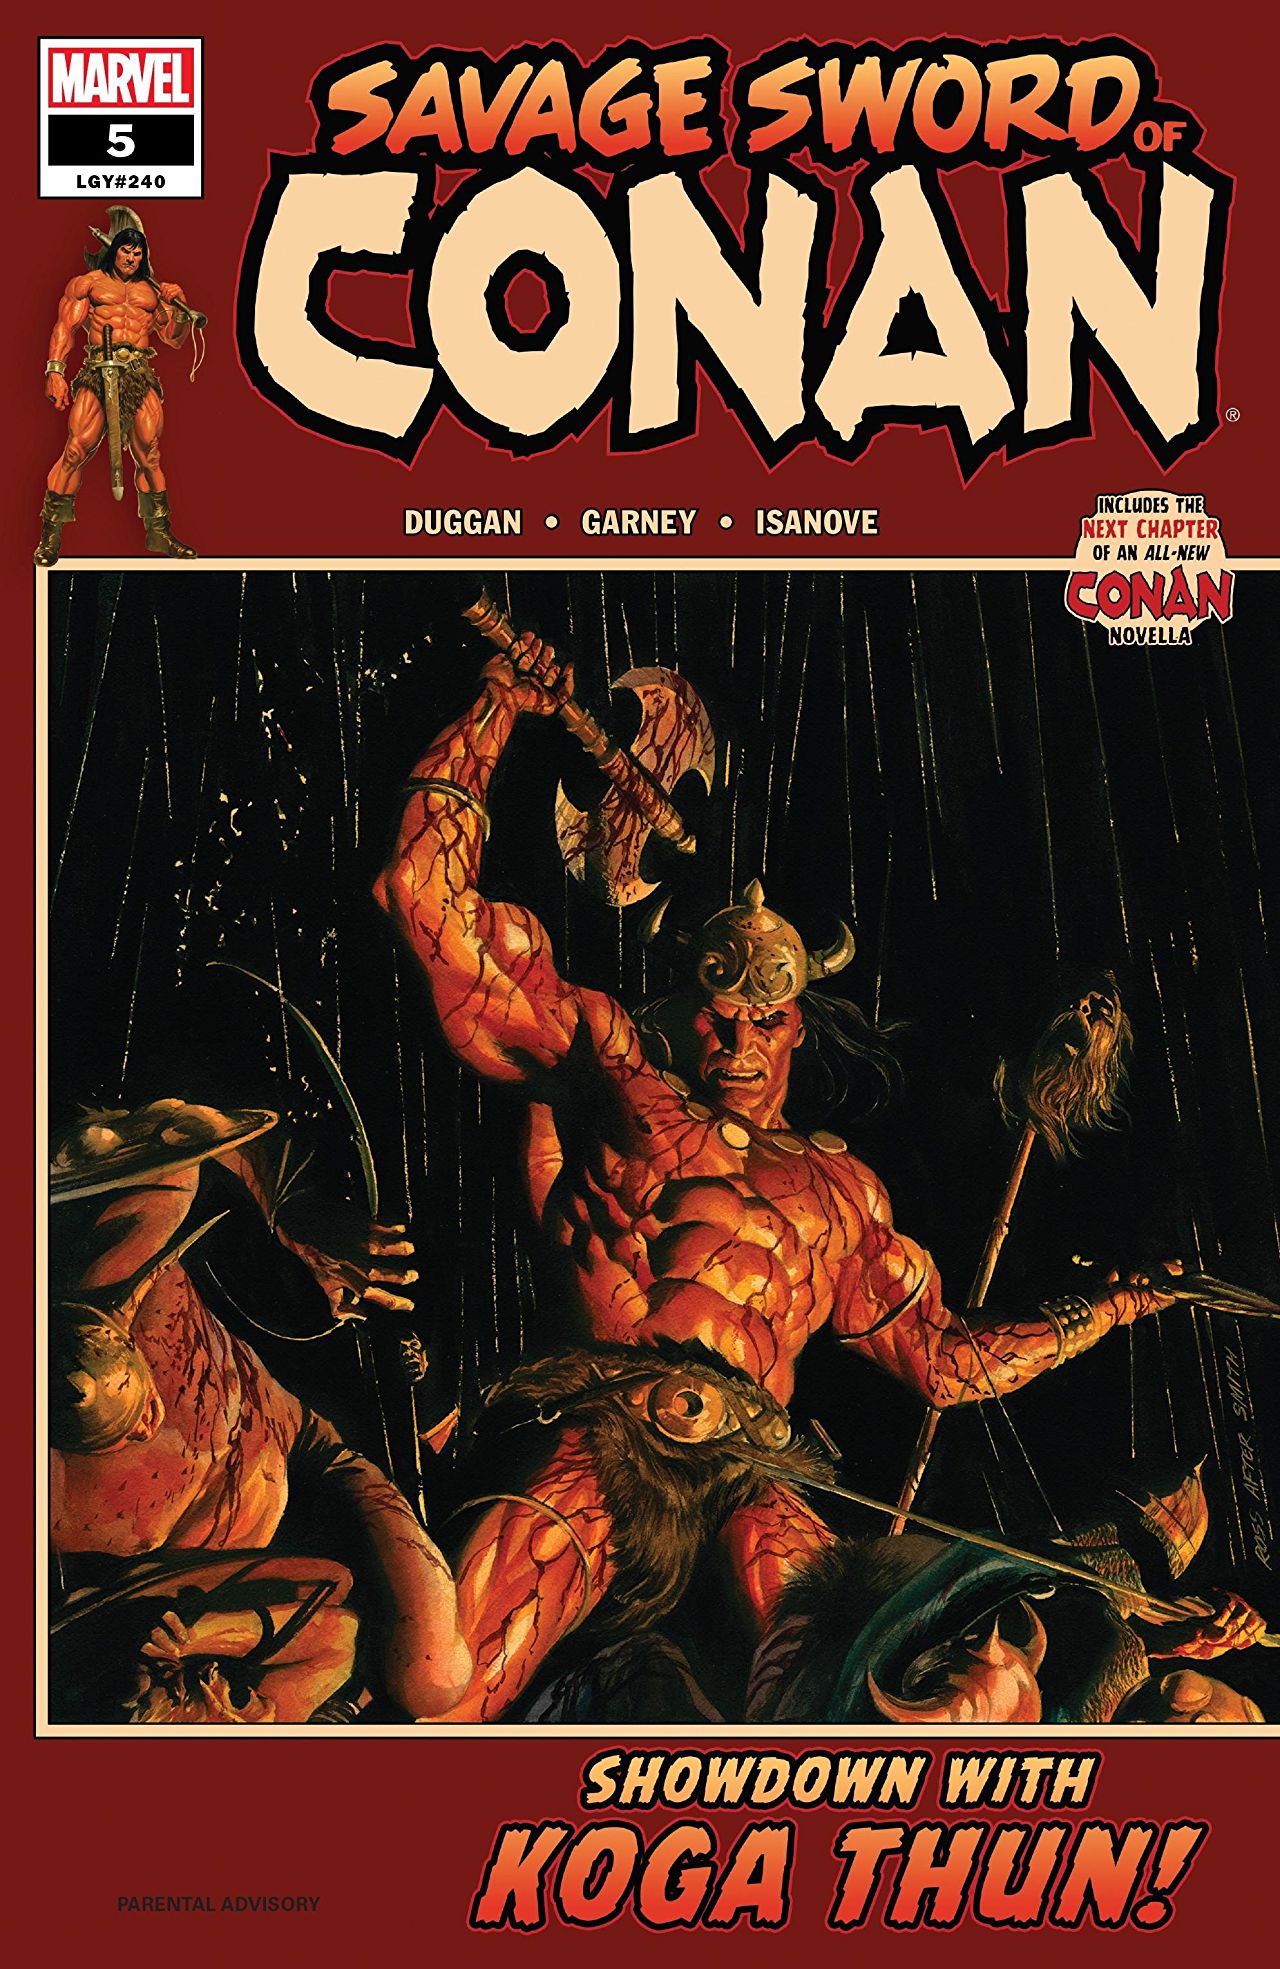 Marvel Preview: Savage Sword of Conan #5